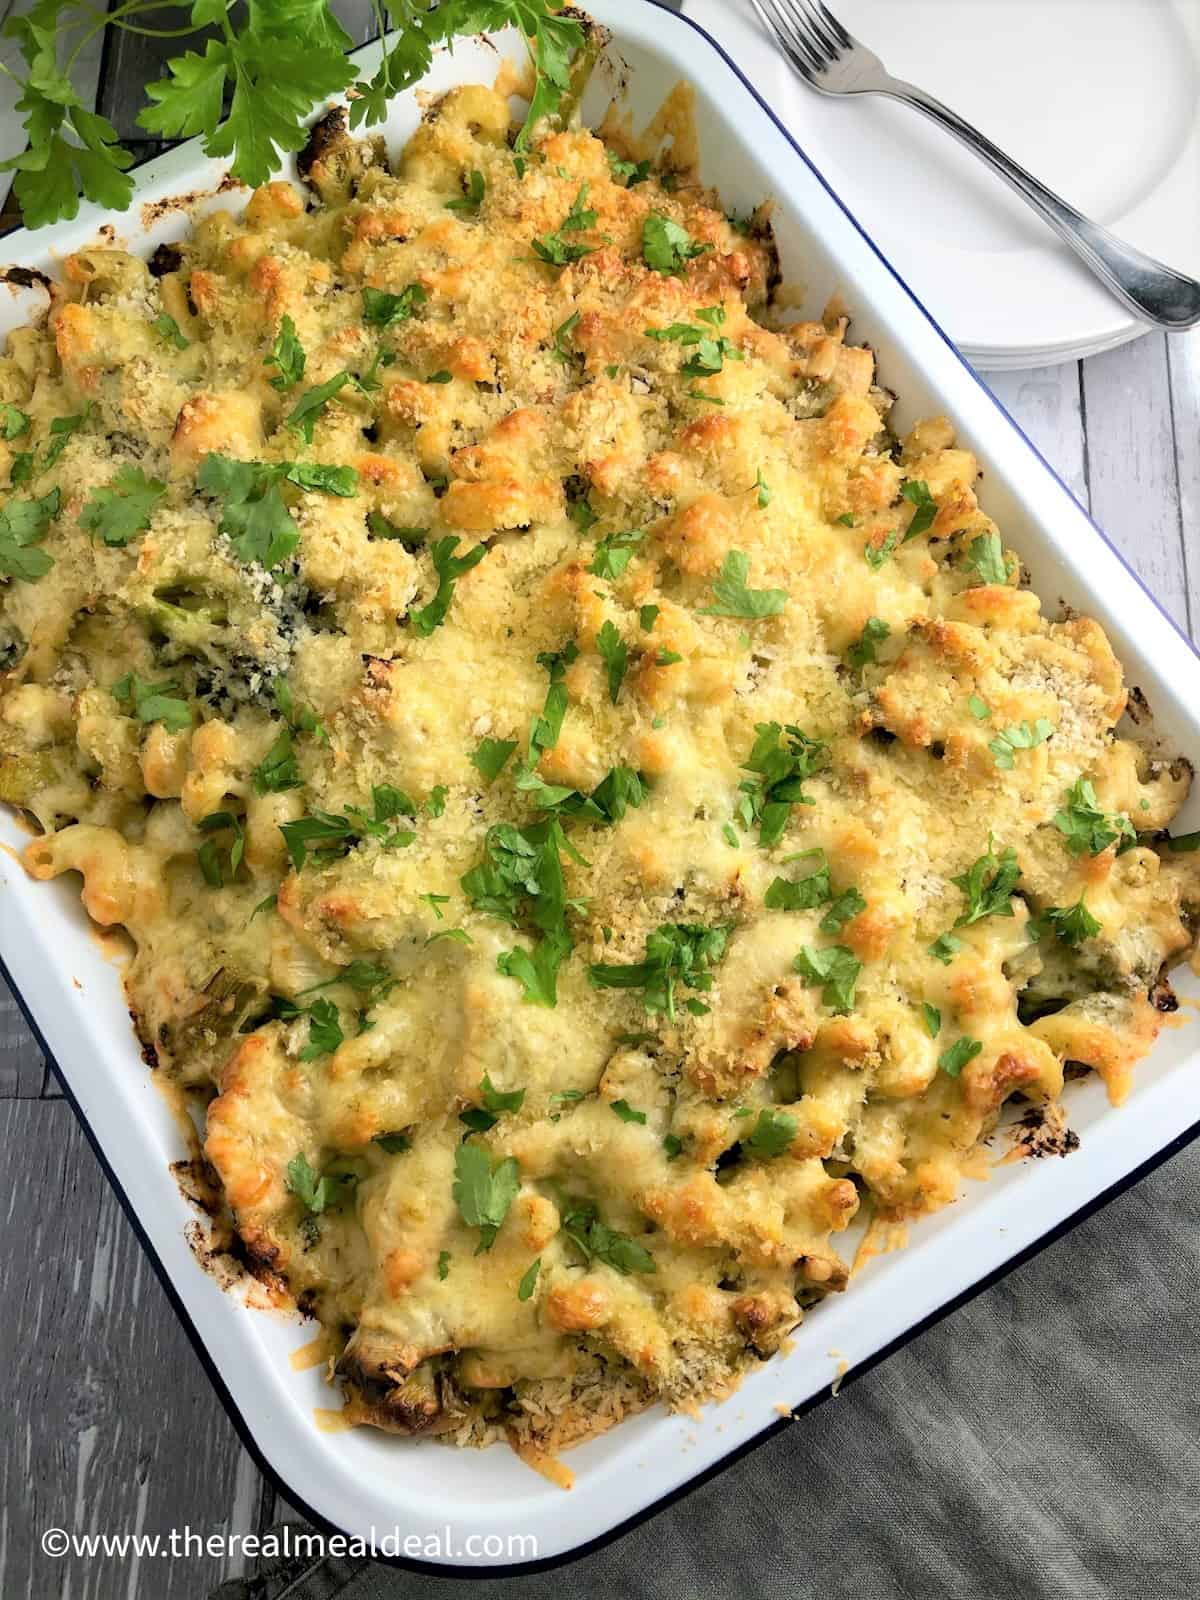 Chicken pasta bake in tray topped with fresh parsley leaves